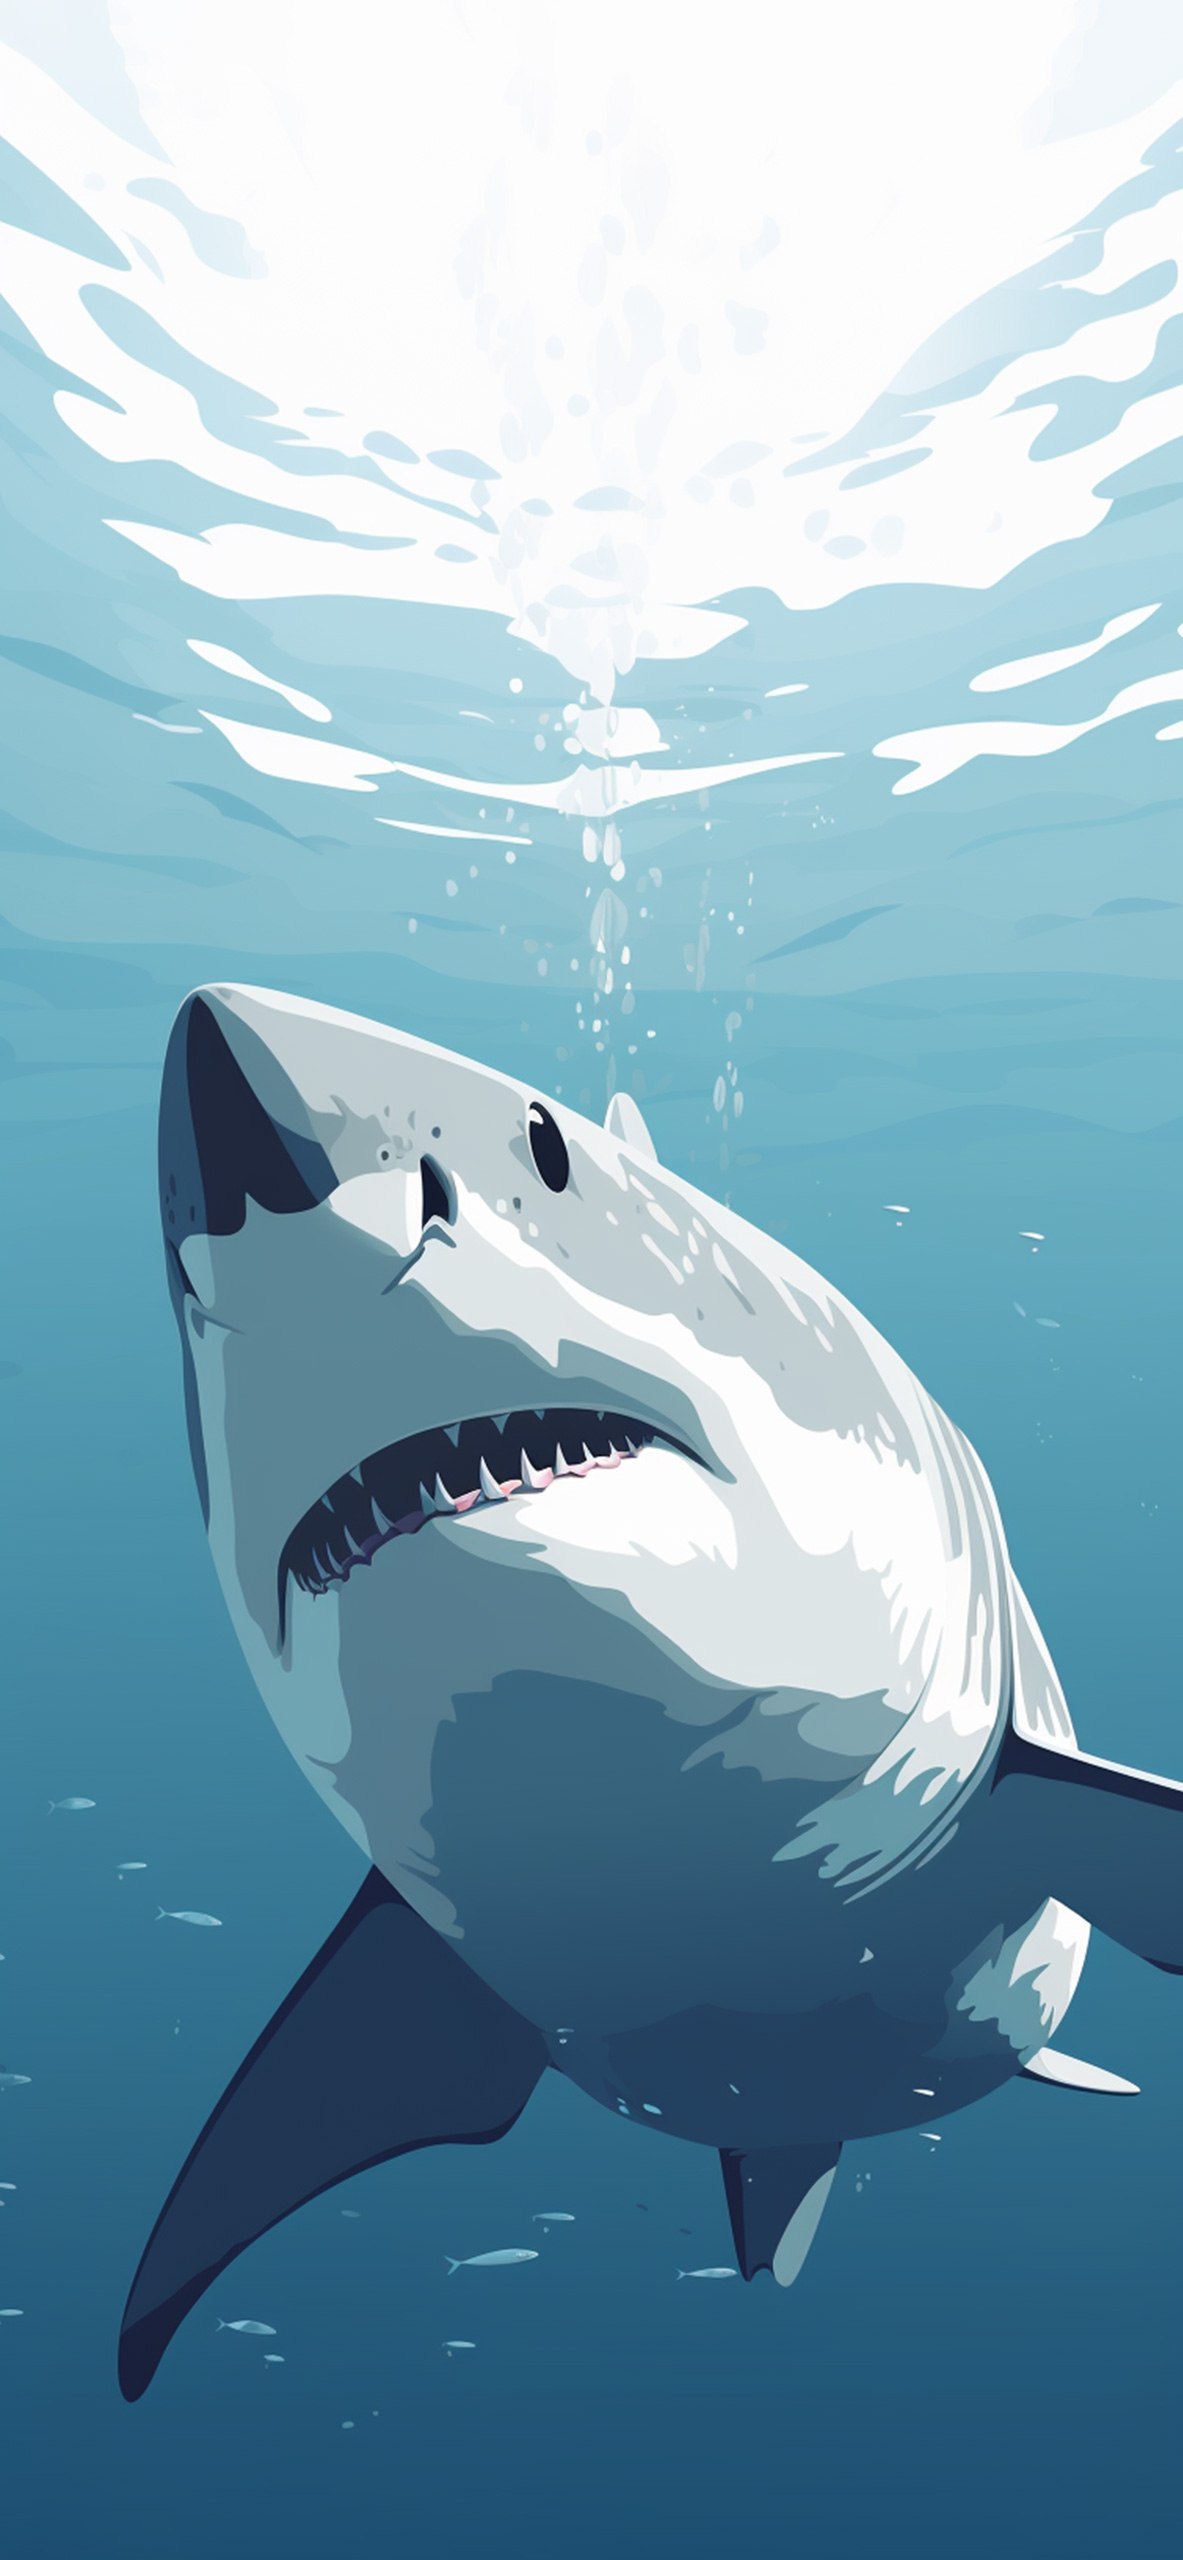 White Shark Blue Wallpapers  Cool Shark Wallpapers for iPhone